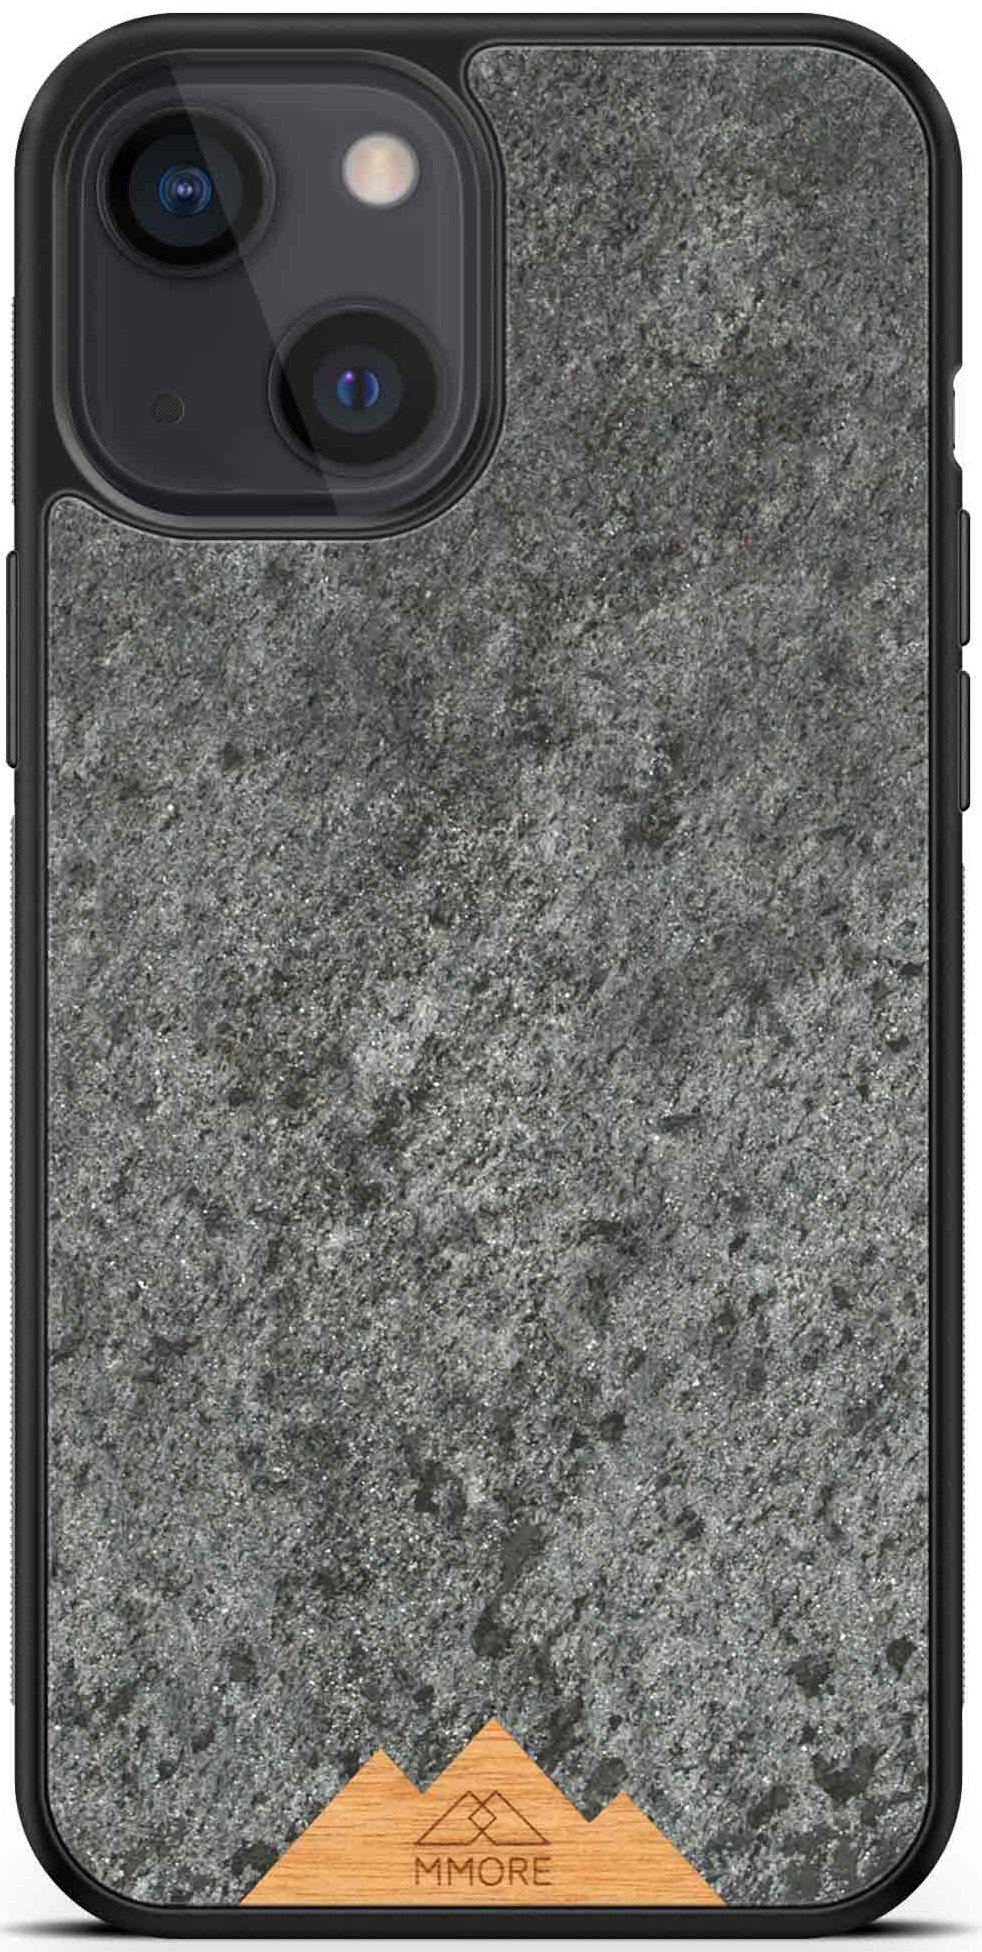 Mmore Mountain Stone phone case